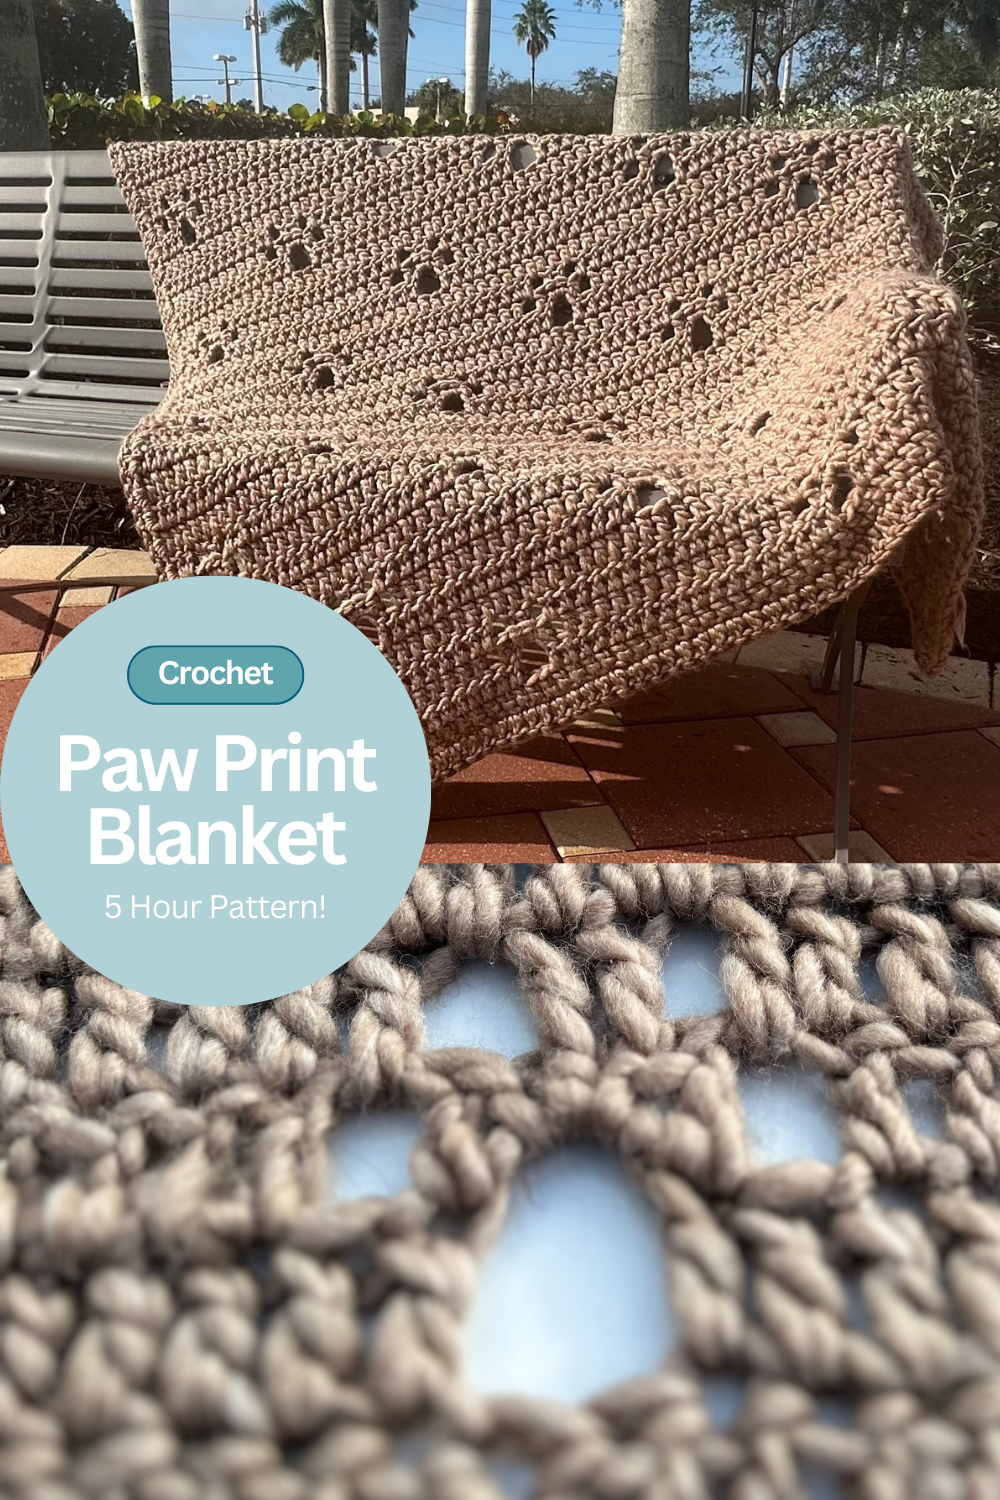 A quick hand knitted pet blanket in 20 minutes! Perfectly used 1